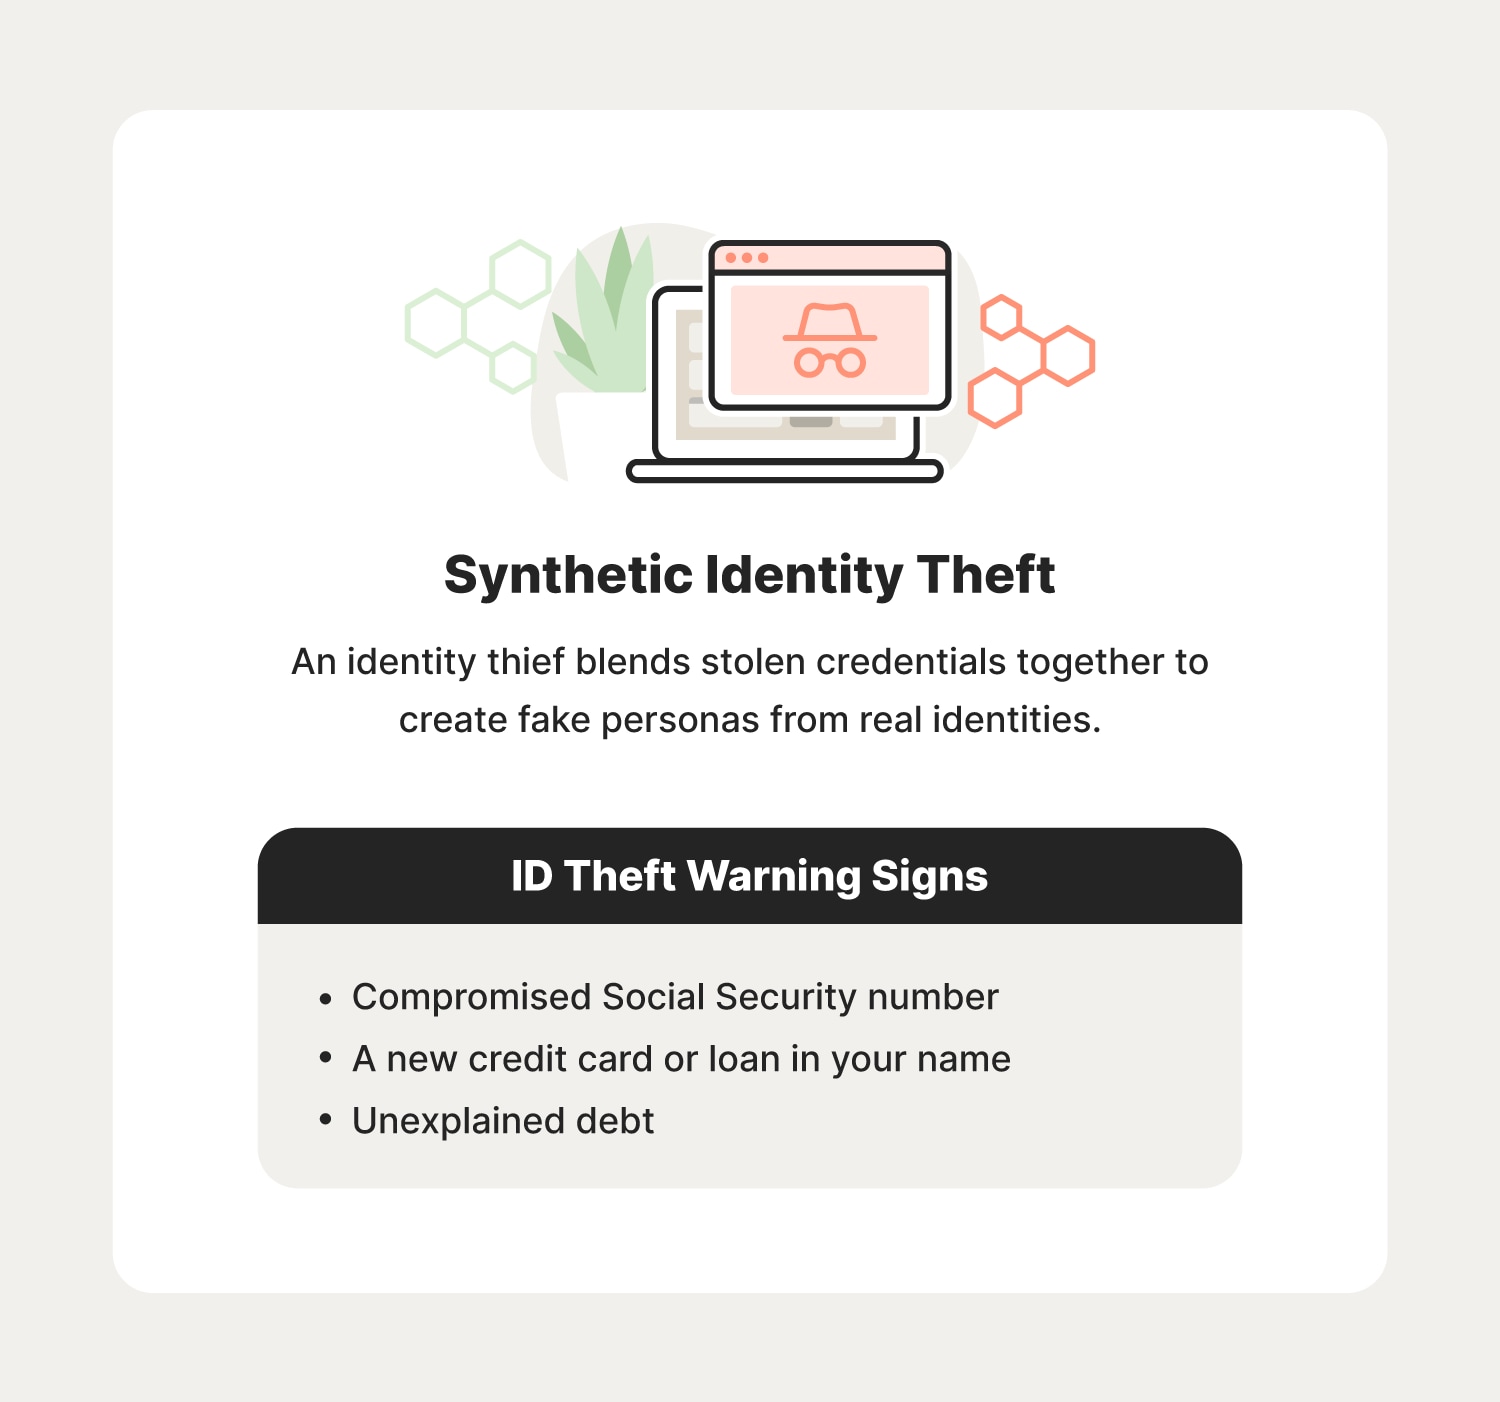 Illustrated chart with information about synthetic identity theft and some warning signs to look out for.